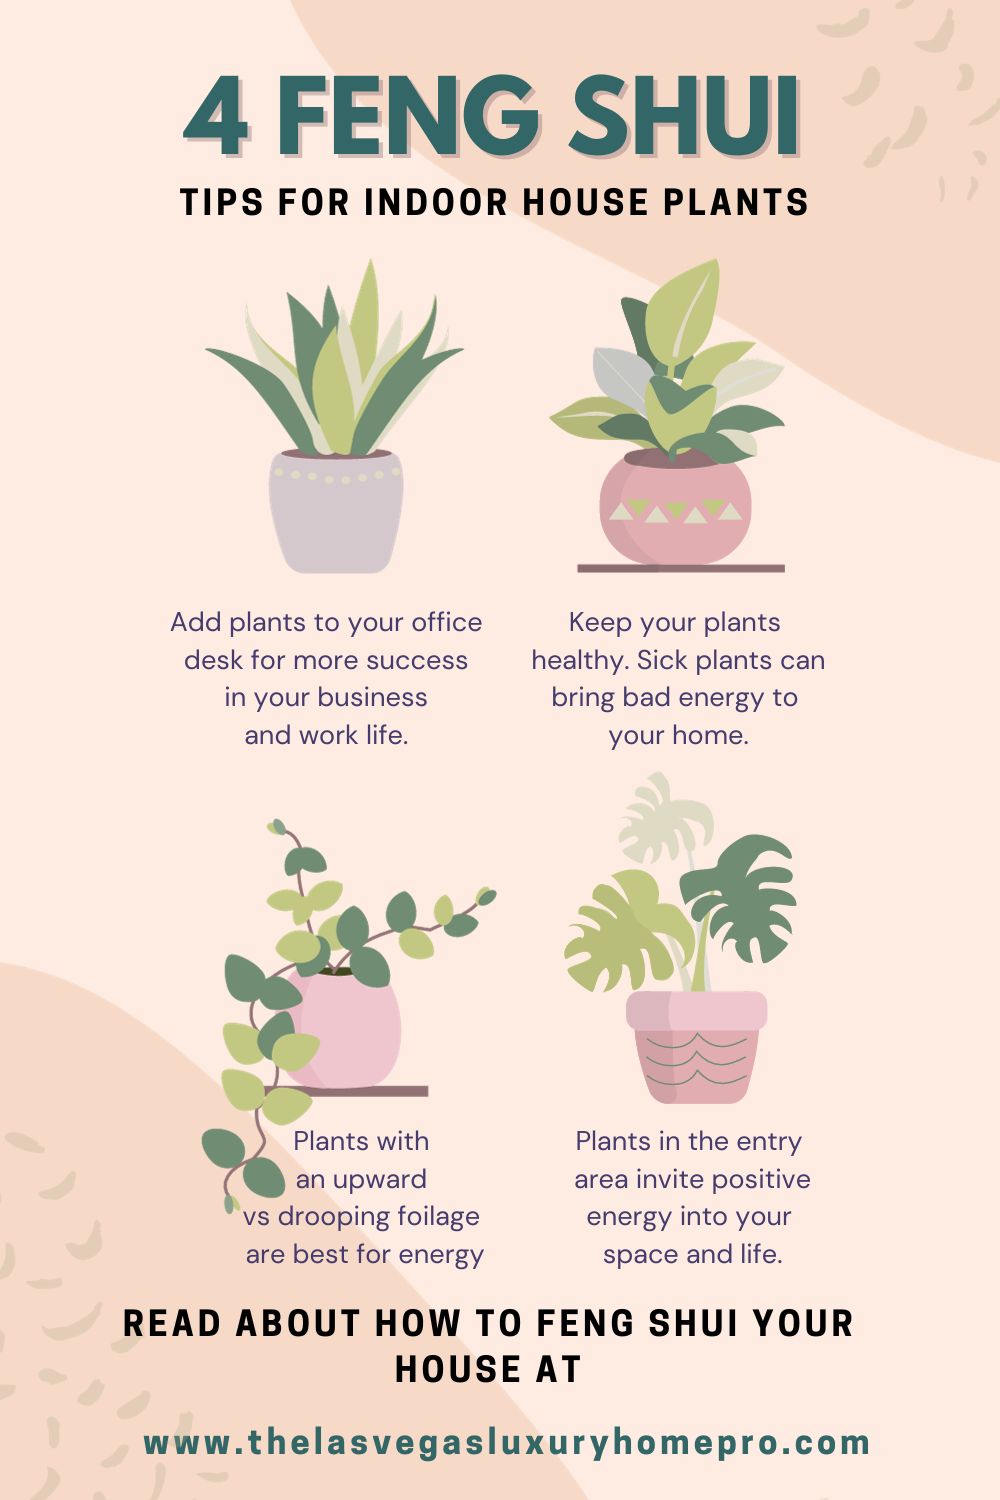 Using Feng Shui plants in your home